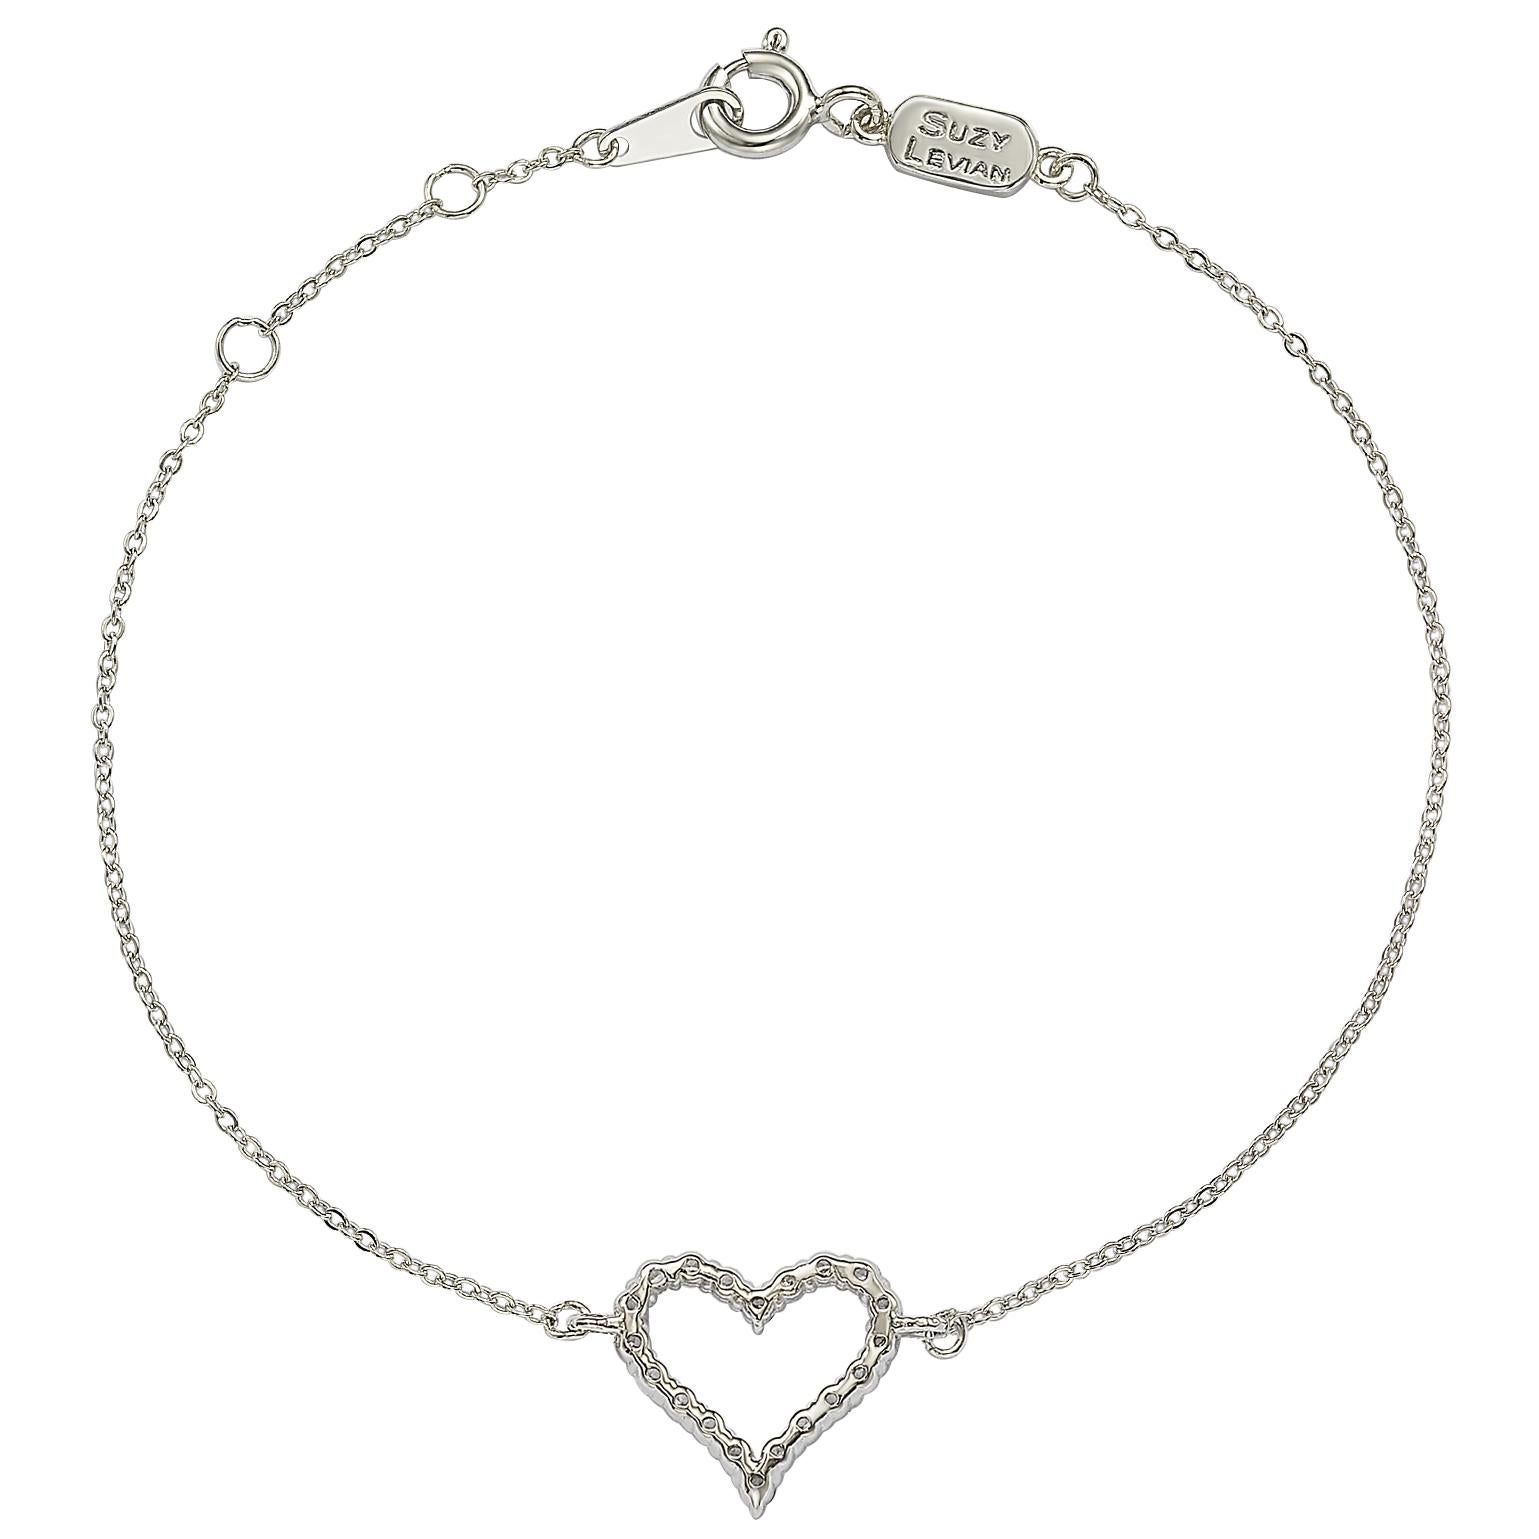 This elegant Suzy Levian heart solitaire bracelet features 19 diamonds, which are 1.4 mm size totals .24 cttw, all set in 14K white gold setting. Each diamond heart is attached to a chain that is secured with a spring ring closure with a yellow gold